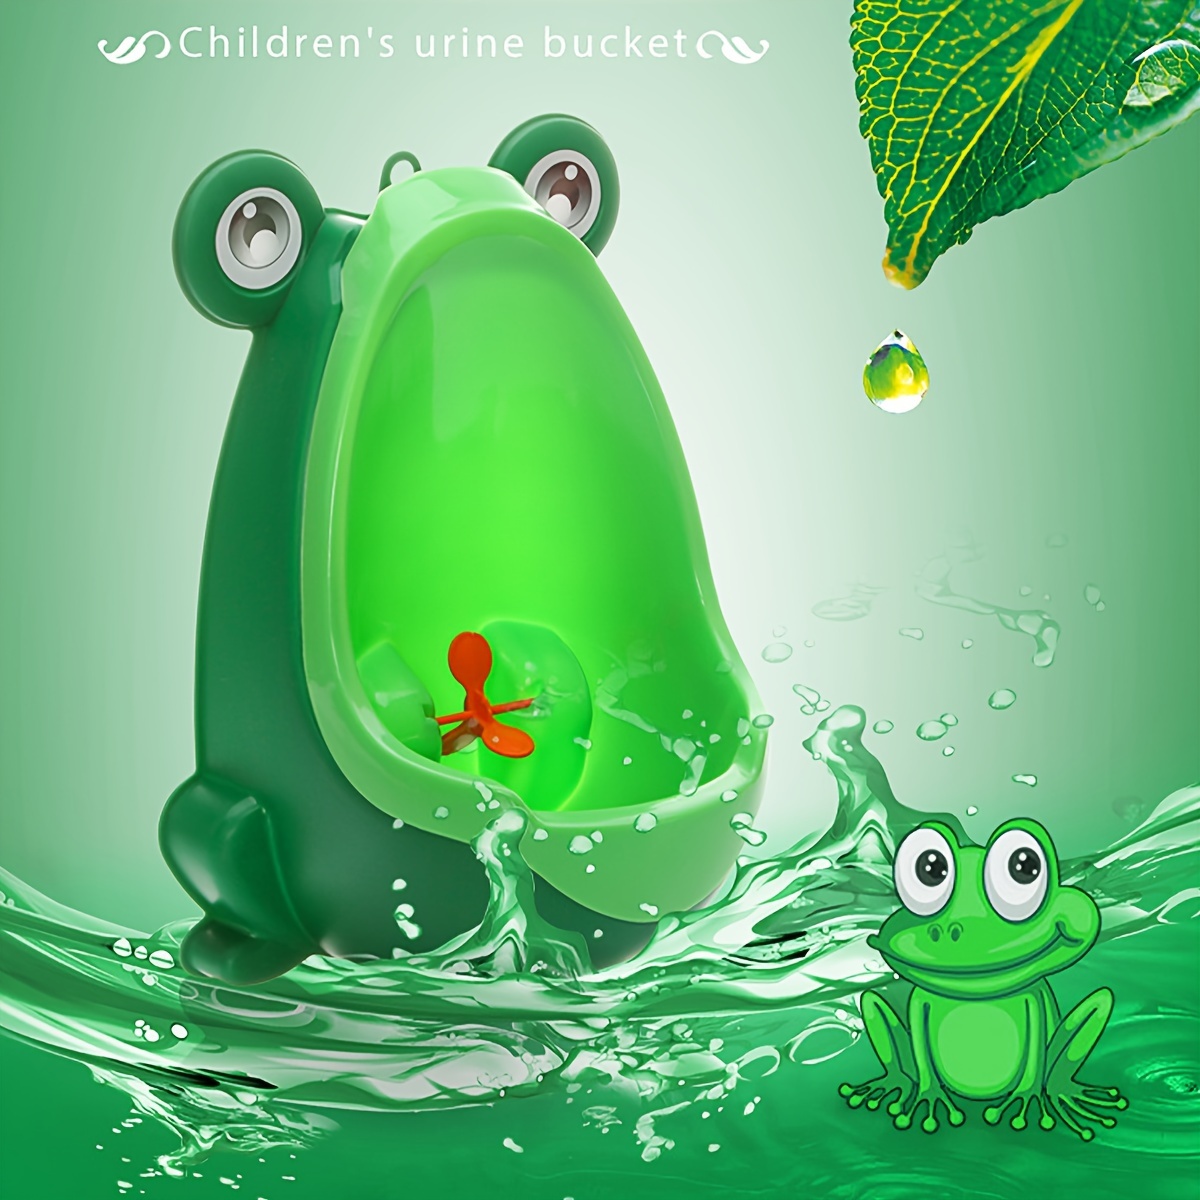 1pc frog shaped potty training urinal wall mounted polypropylene material kid friendly design with whirling target easy   7 08x6 29x10 62 inches details 2